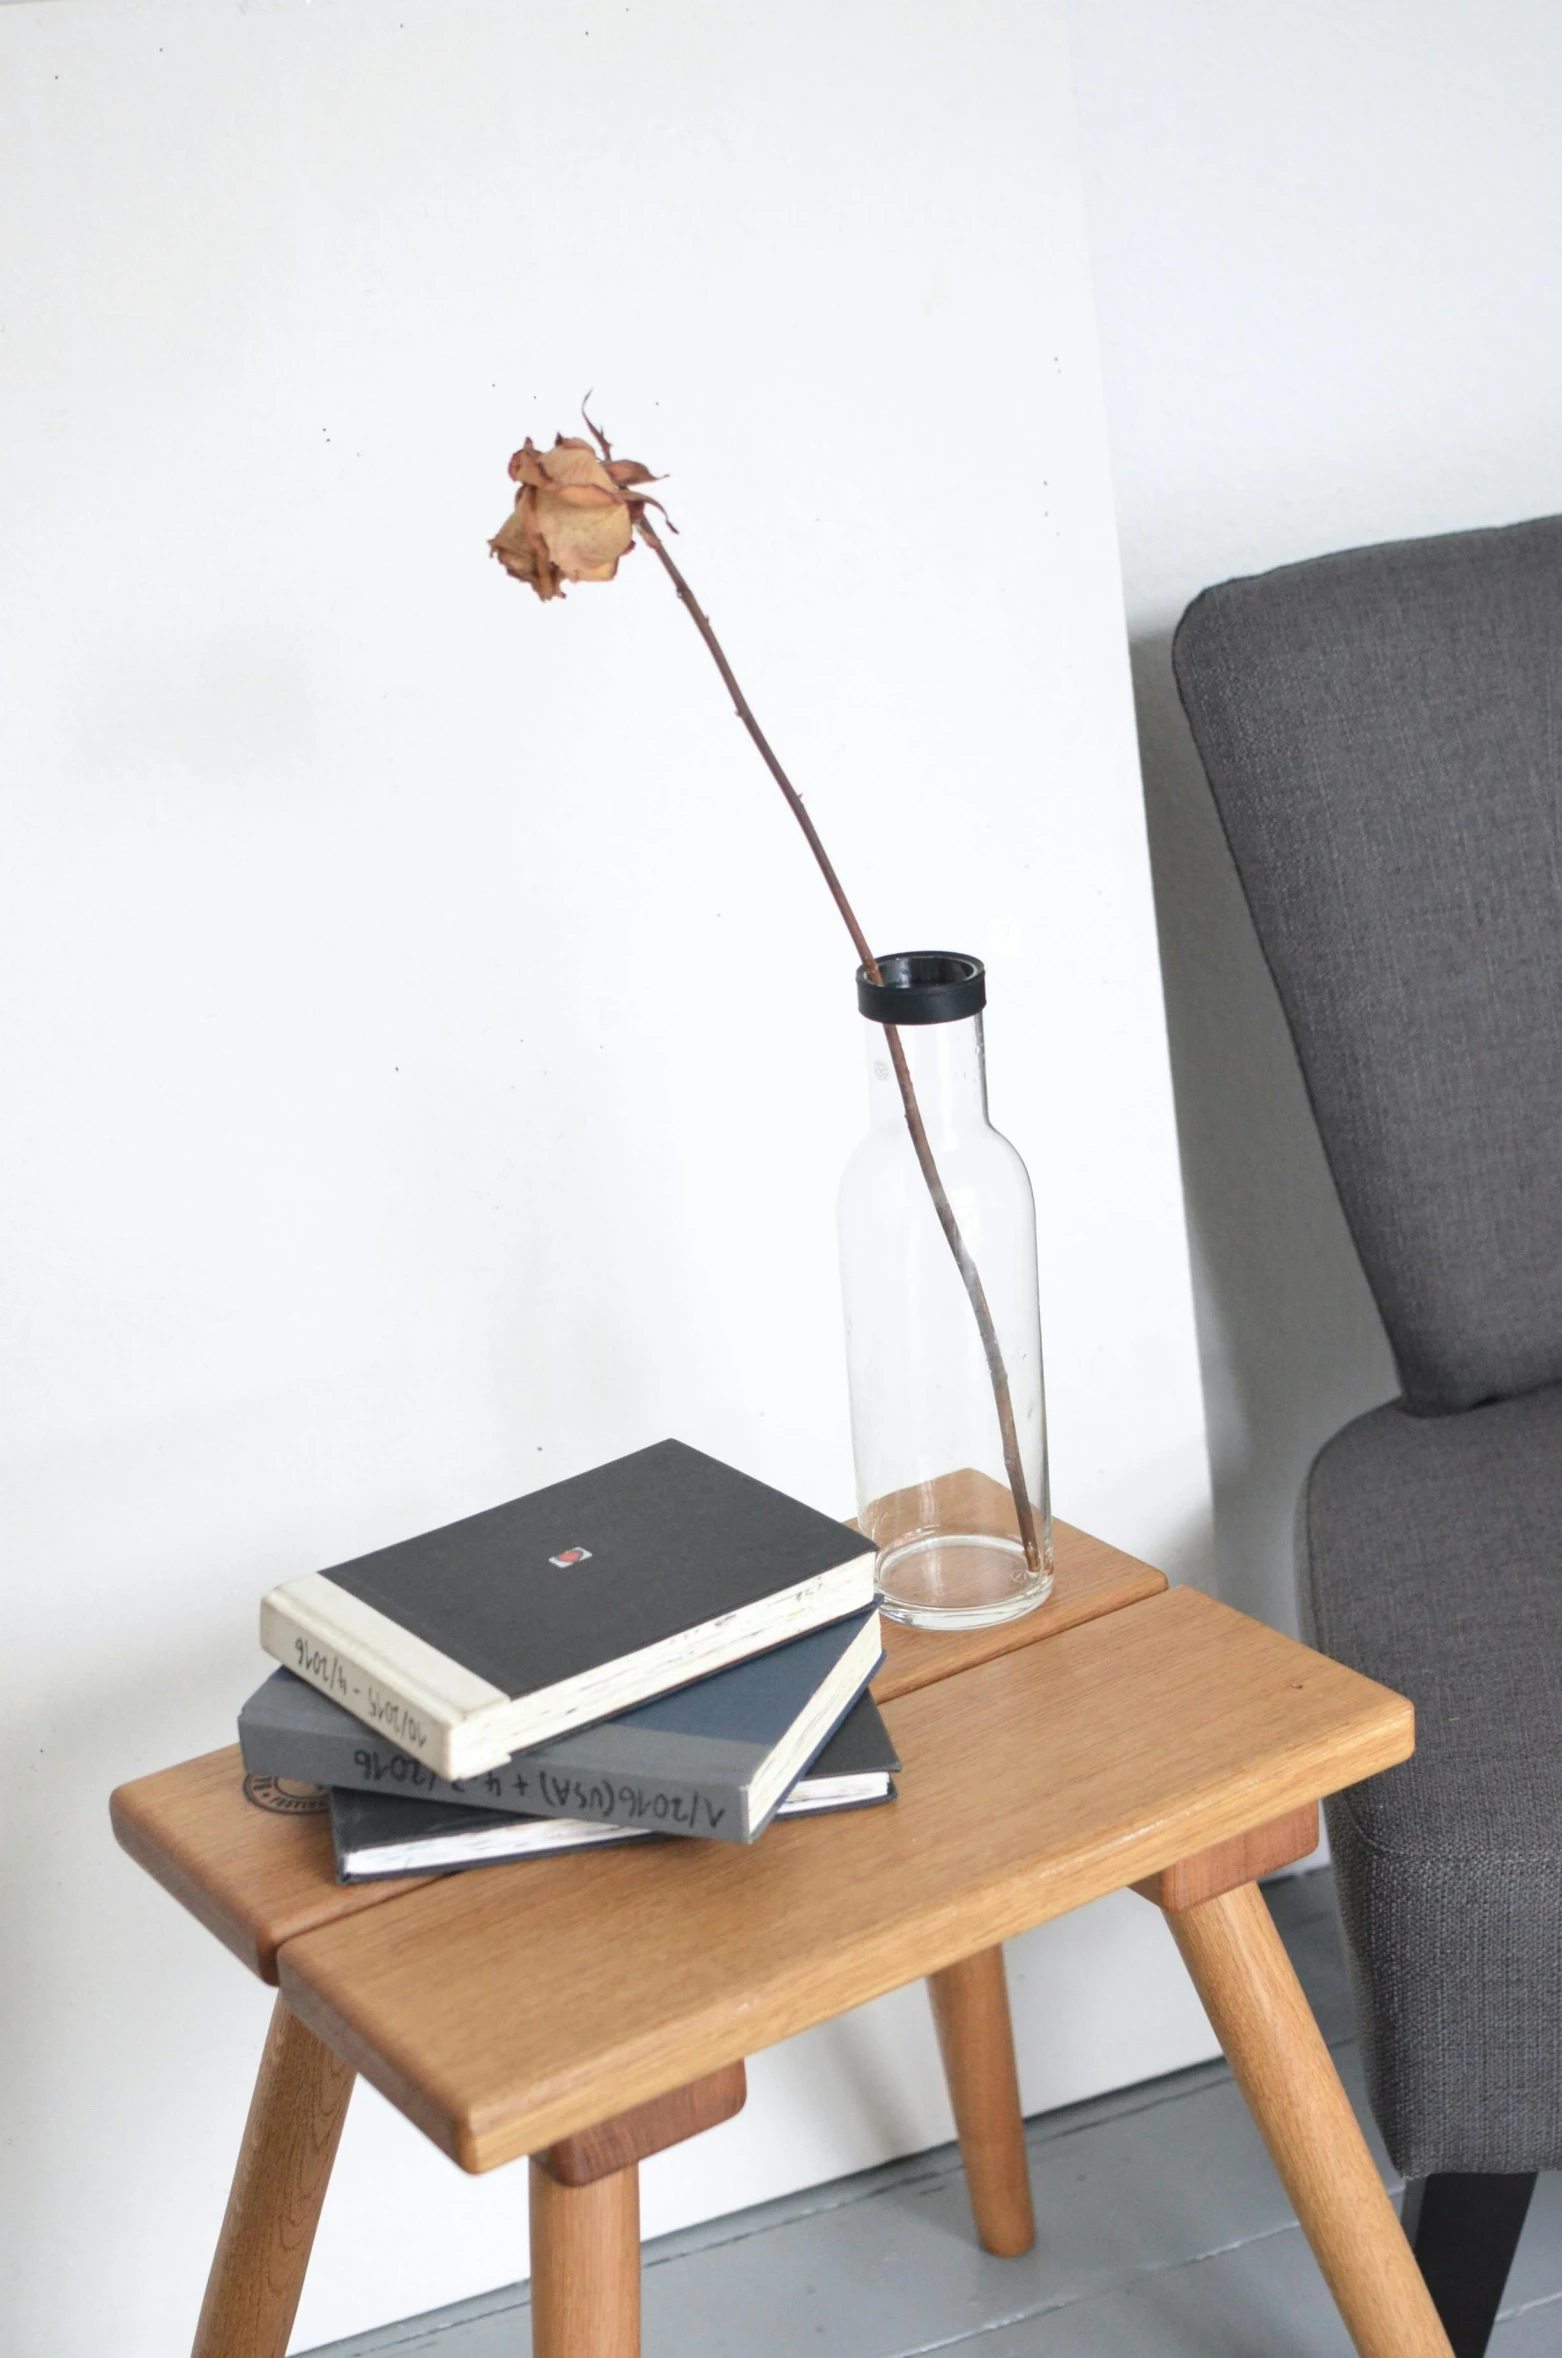 a small table with books and a vase on it, black rose, japanese collection product, candid shot, 3 pm